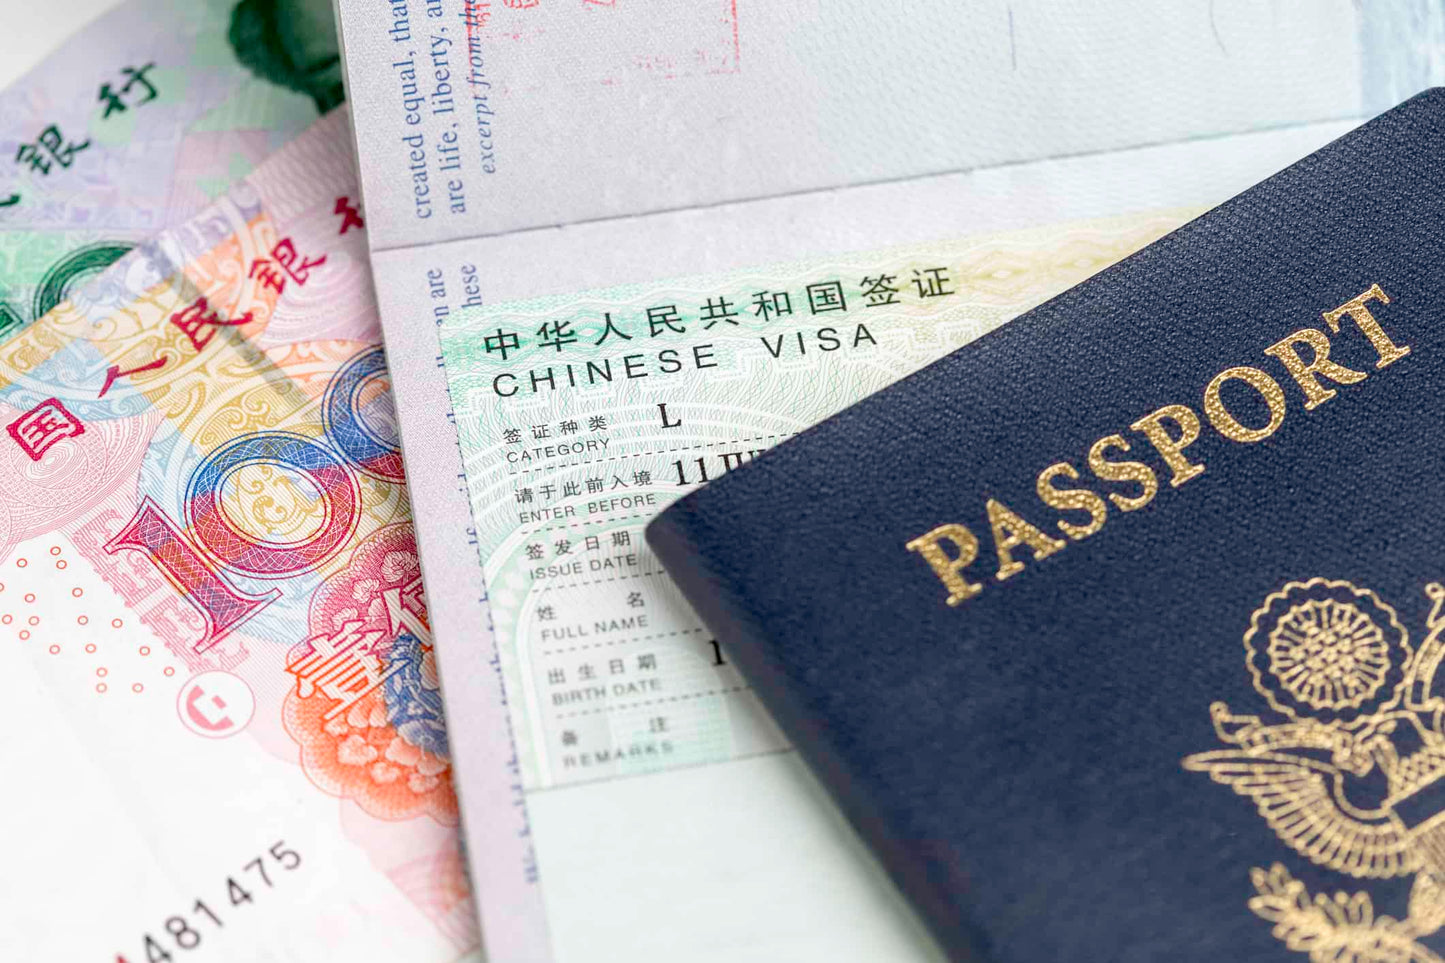 (Expedited Service) China Q1 Exceed 180 Days Family Visa All Fees Are Included (DC Consular District)